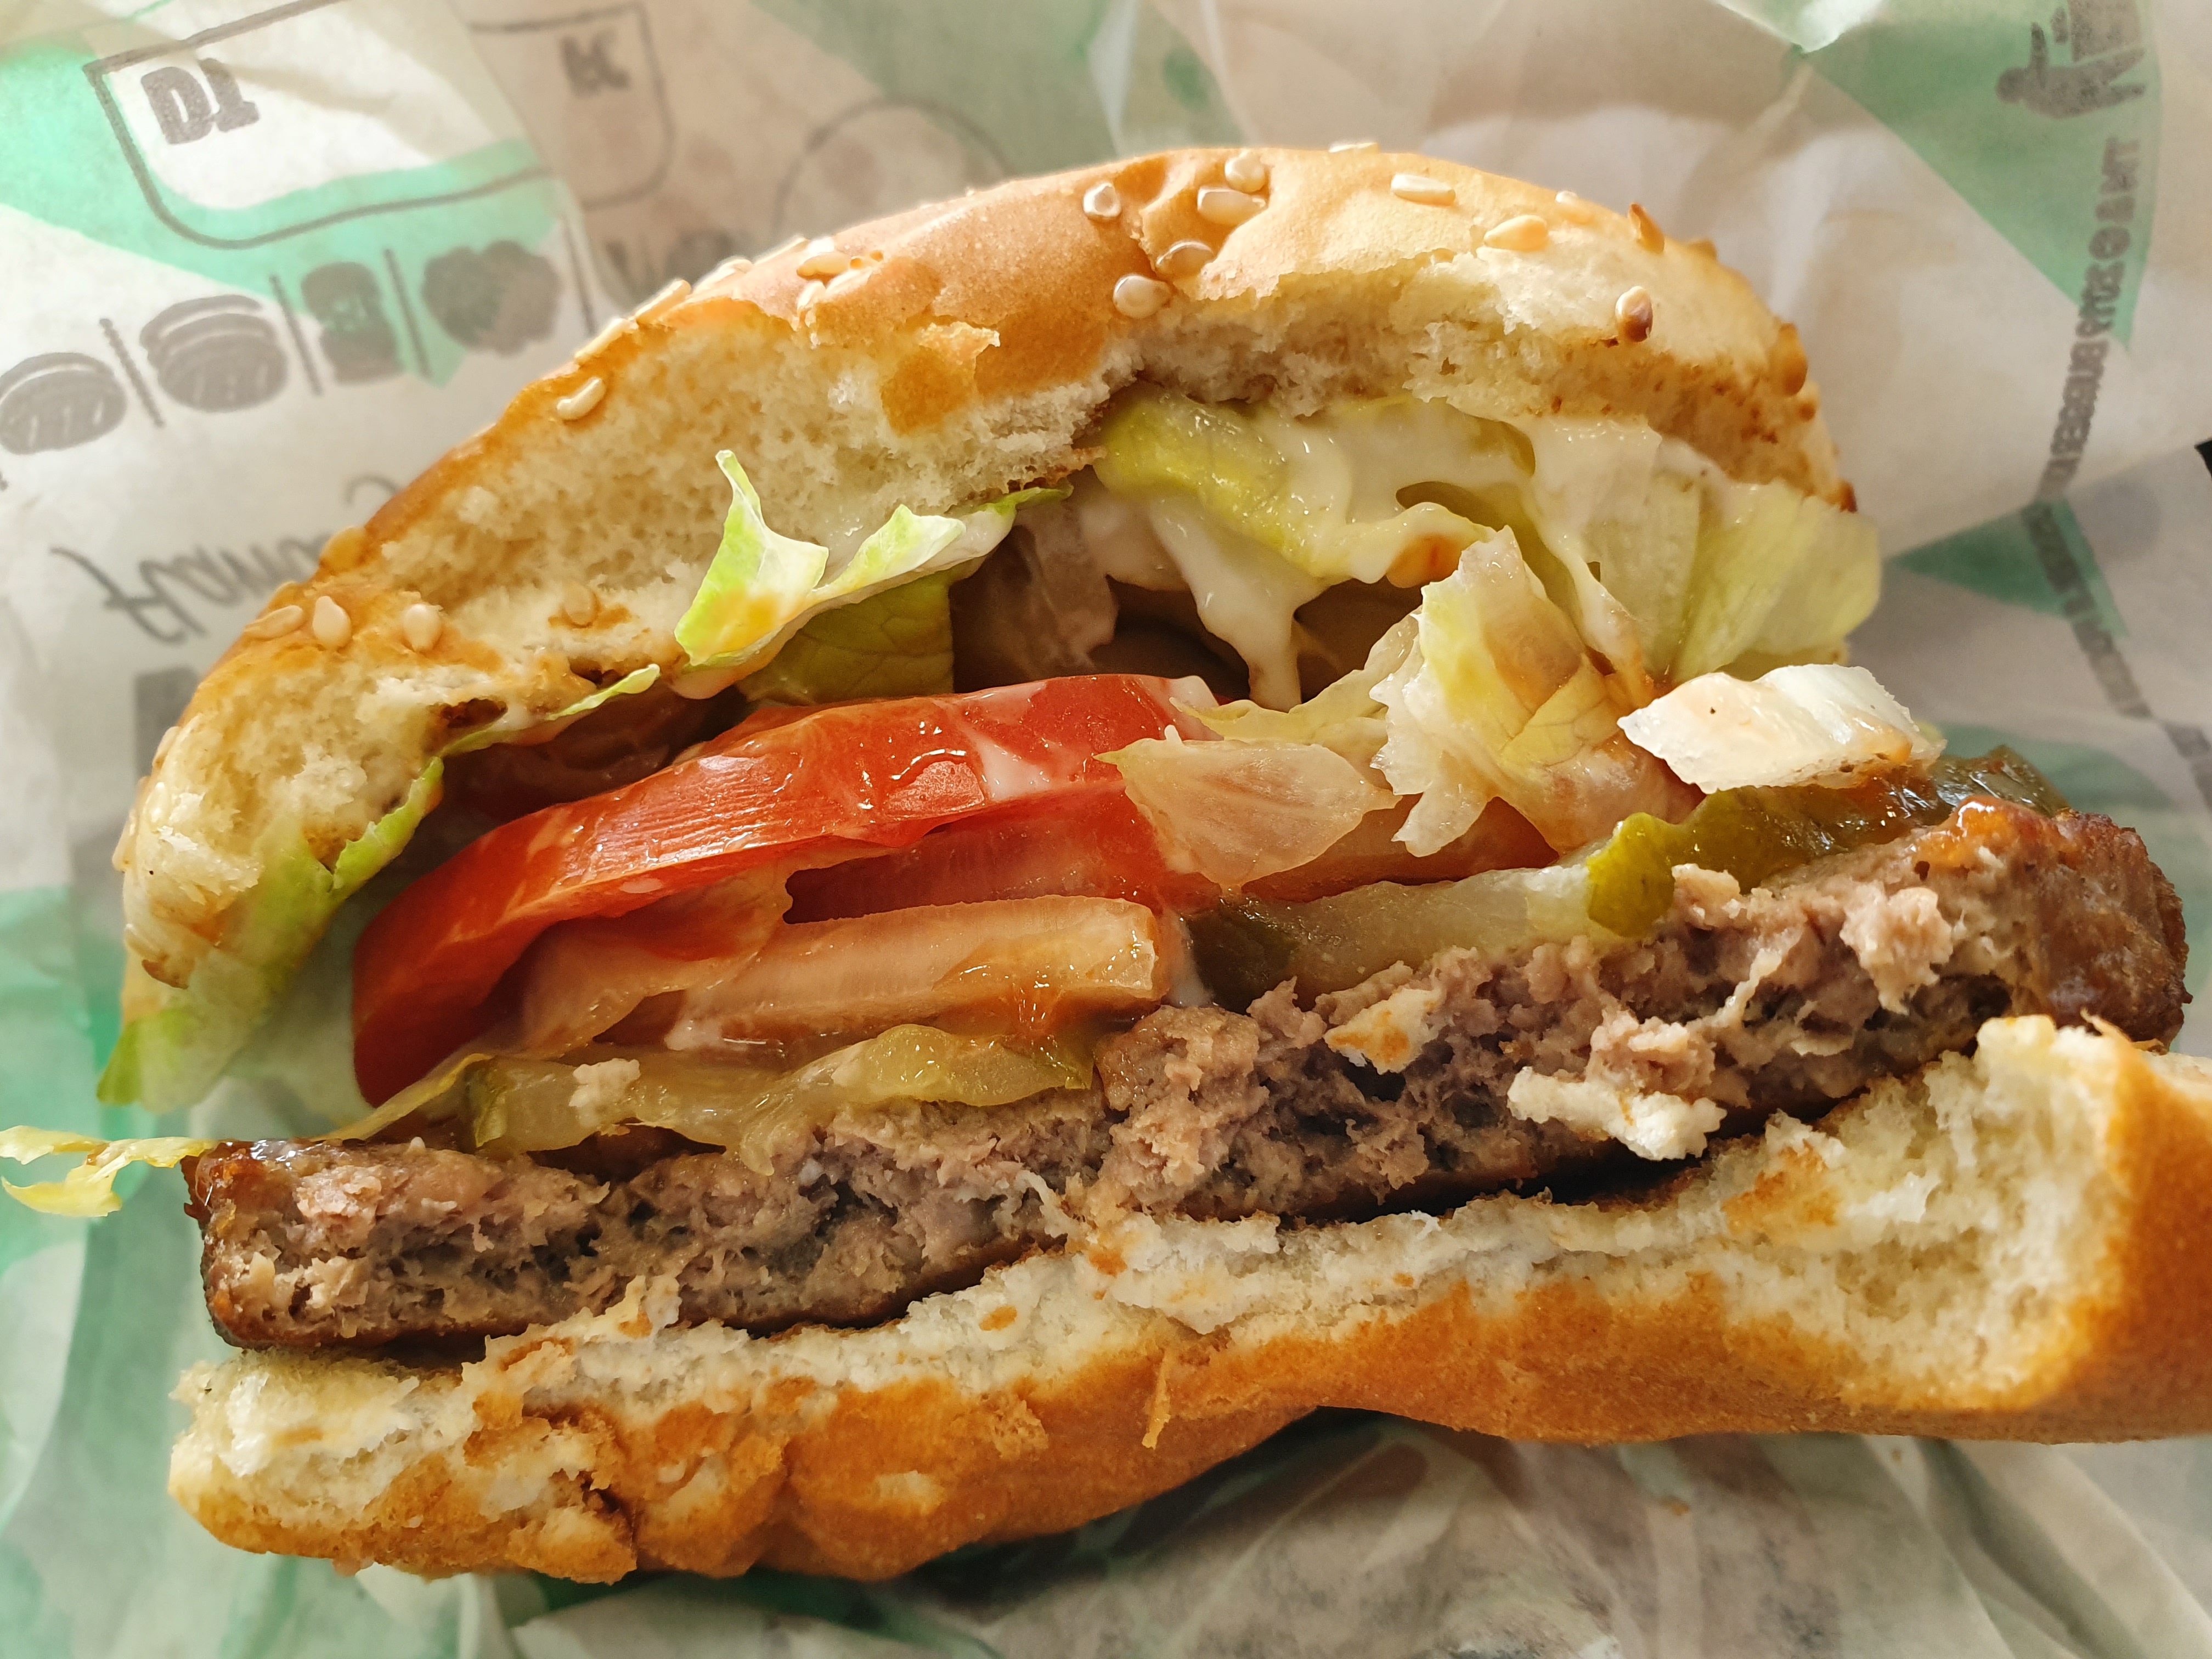 File:Impossible WHOPPER.jpg - Wikimedia Commons